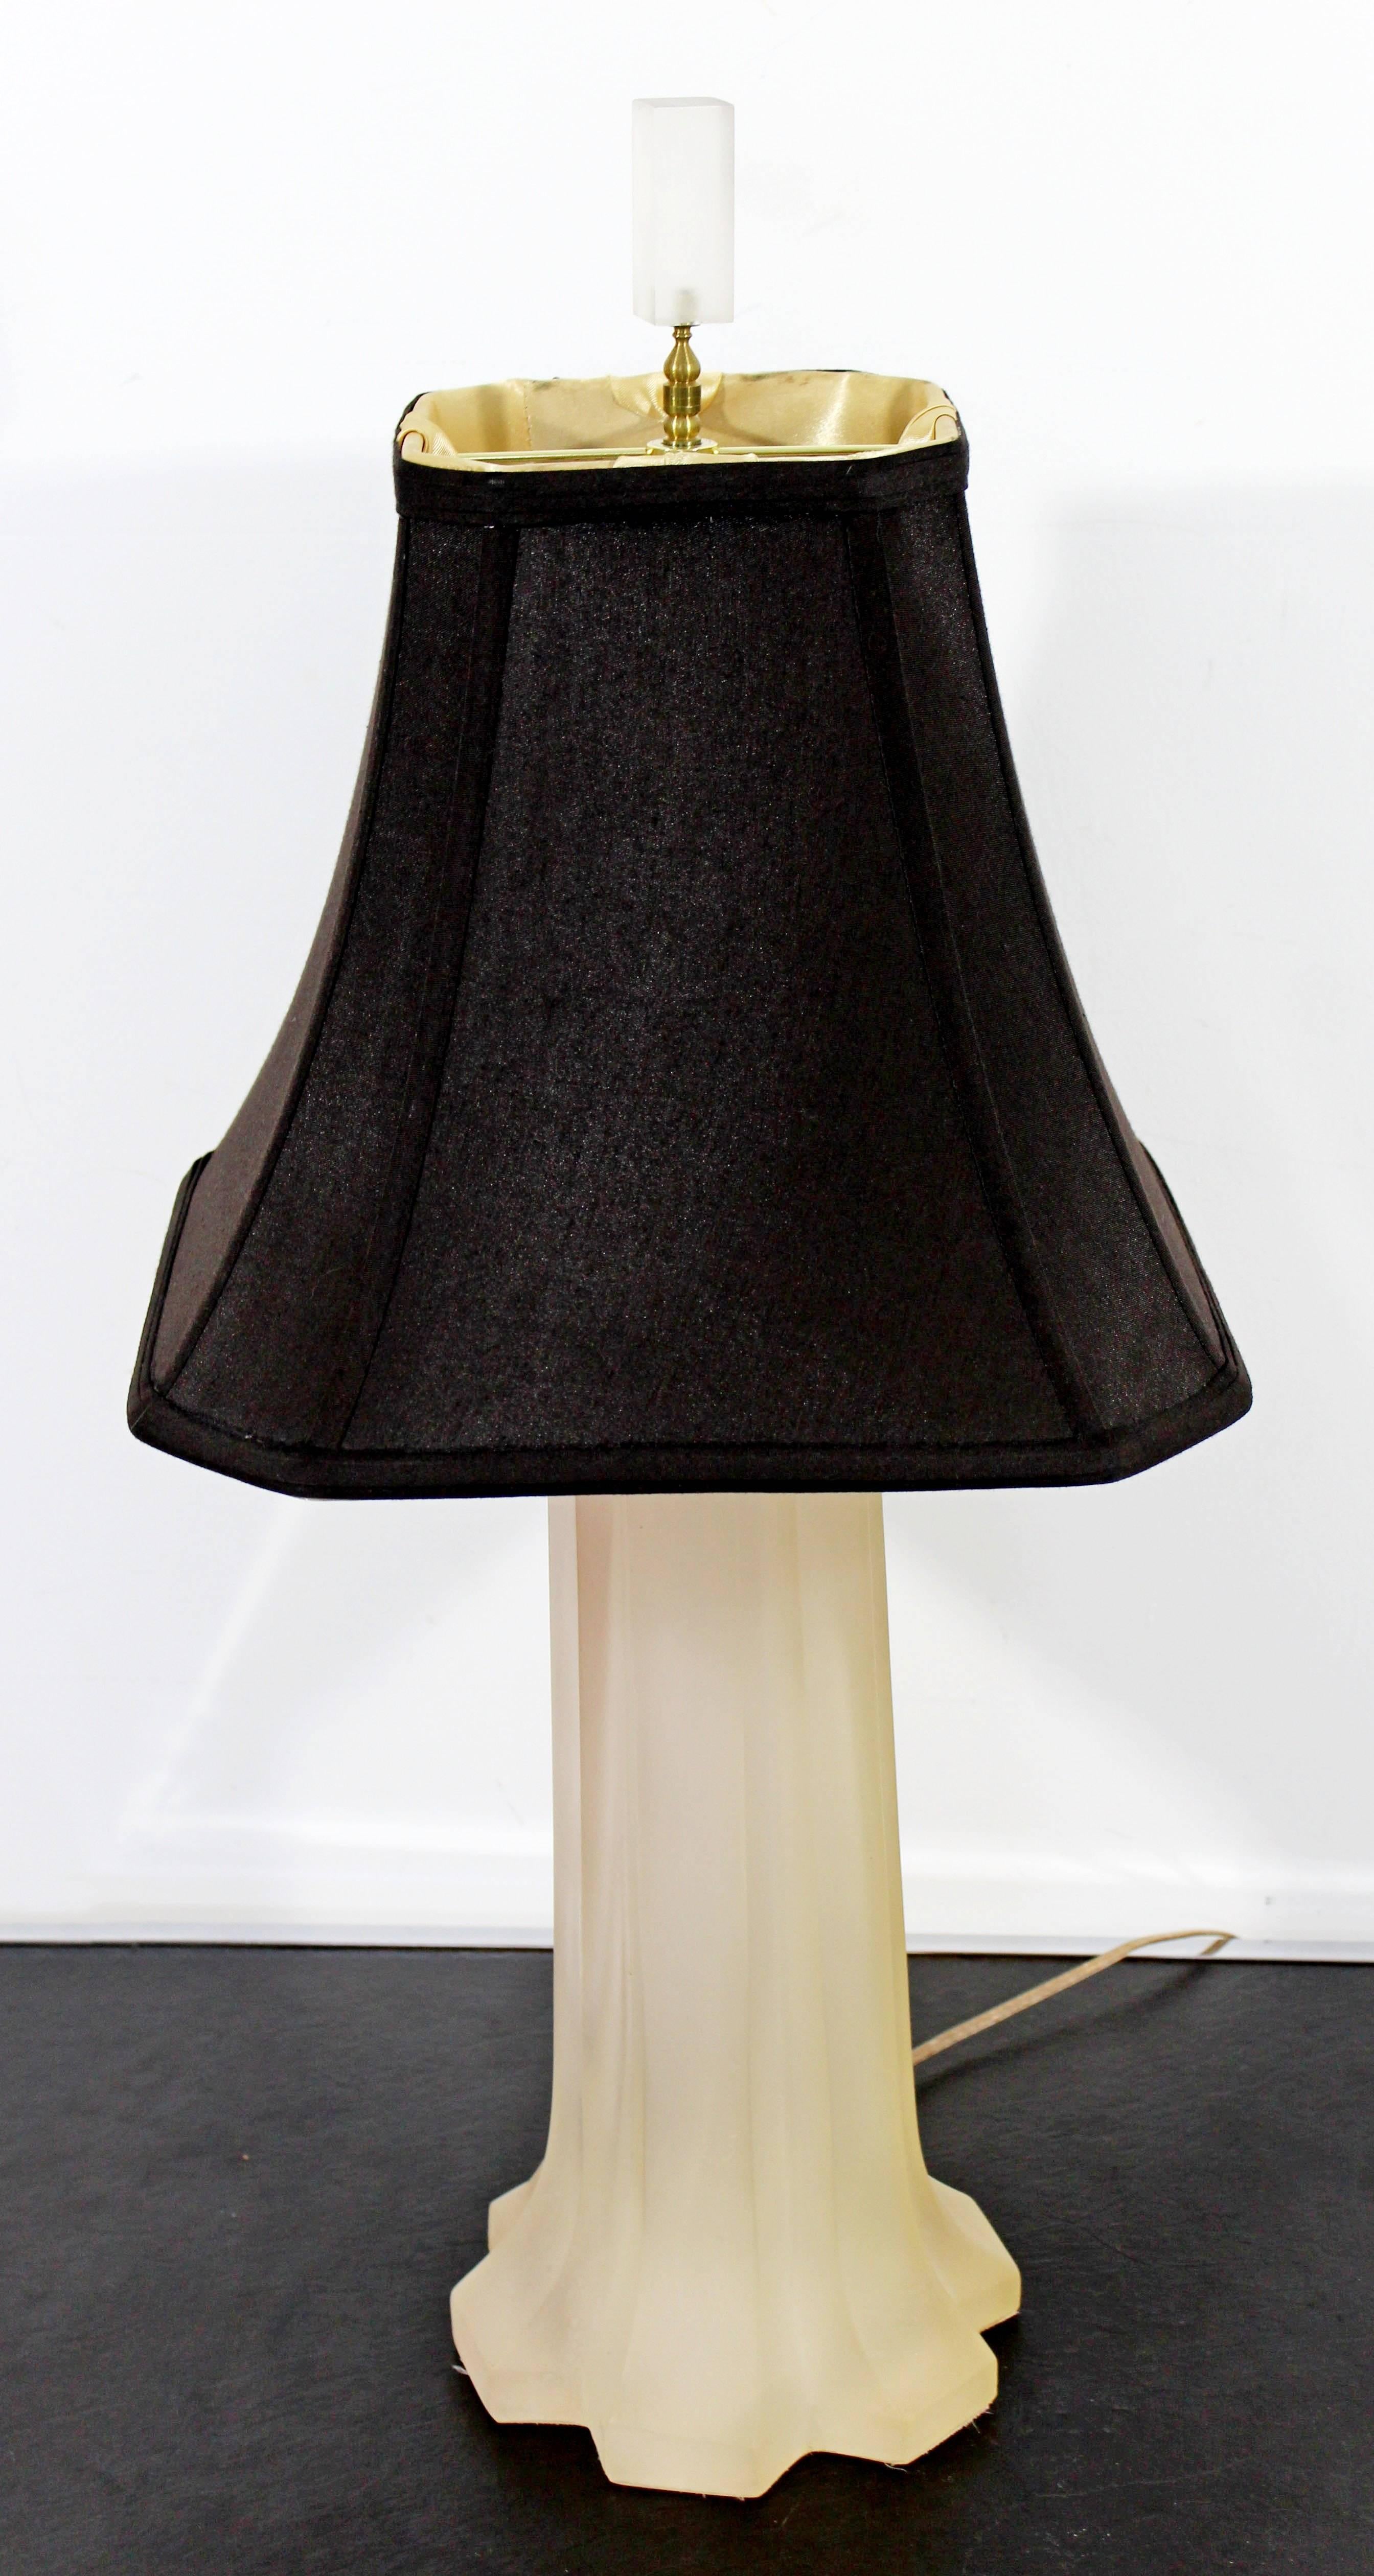 For your consideration is a beautiful, frosted resin table lamp with its original finial, designed and signed by Italian Designer Paolo Gucci, circa the 1970s. Silk shade included. In excellent condition. The dimensions of the lamp are 8